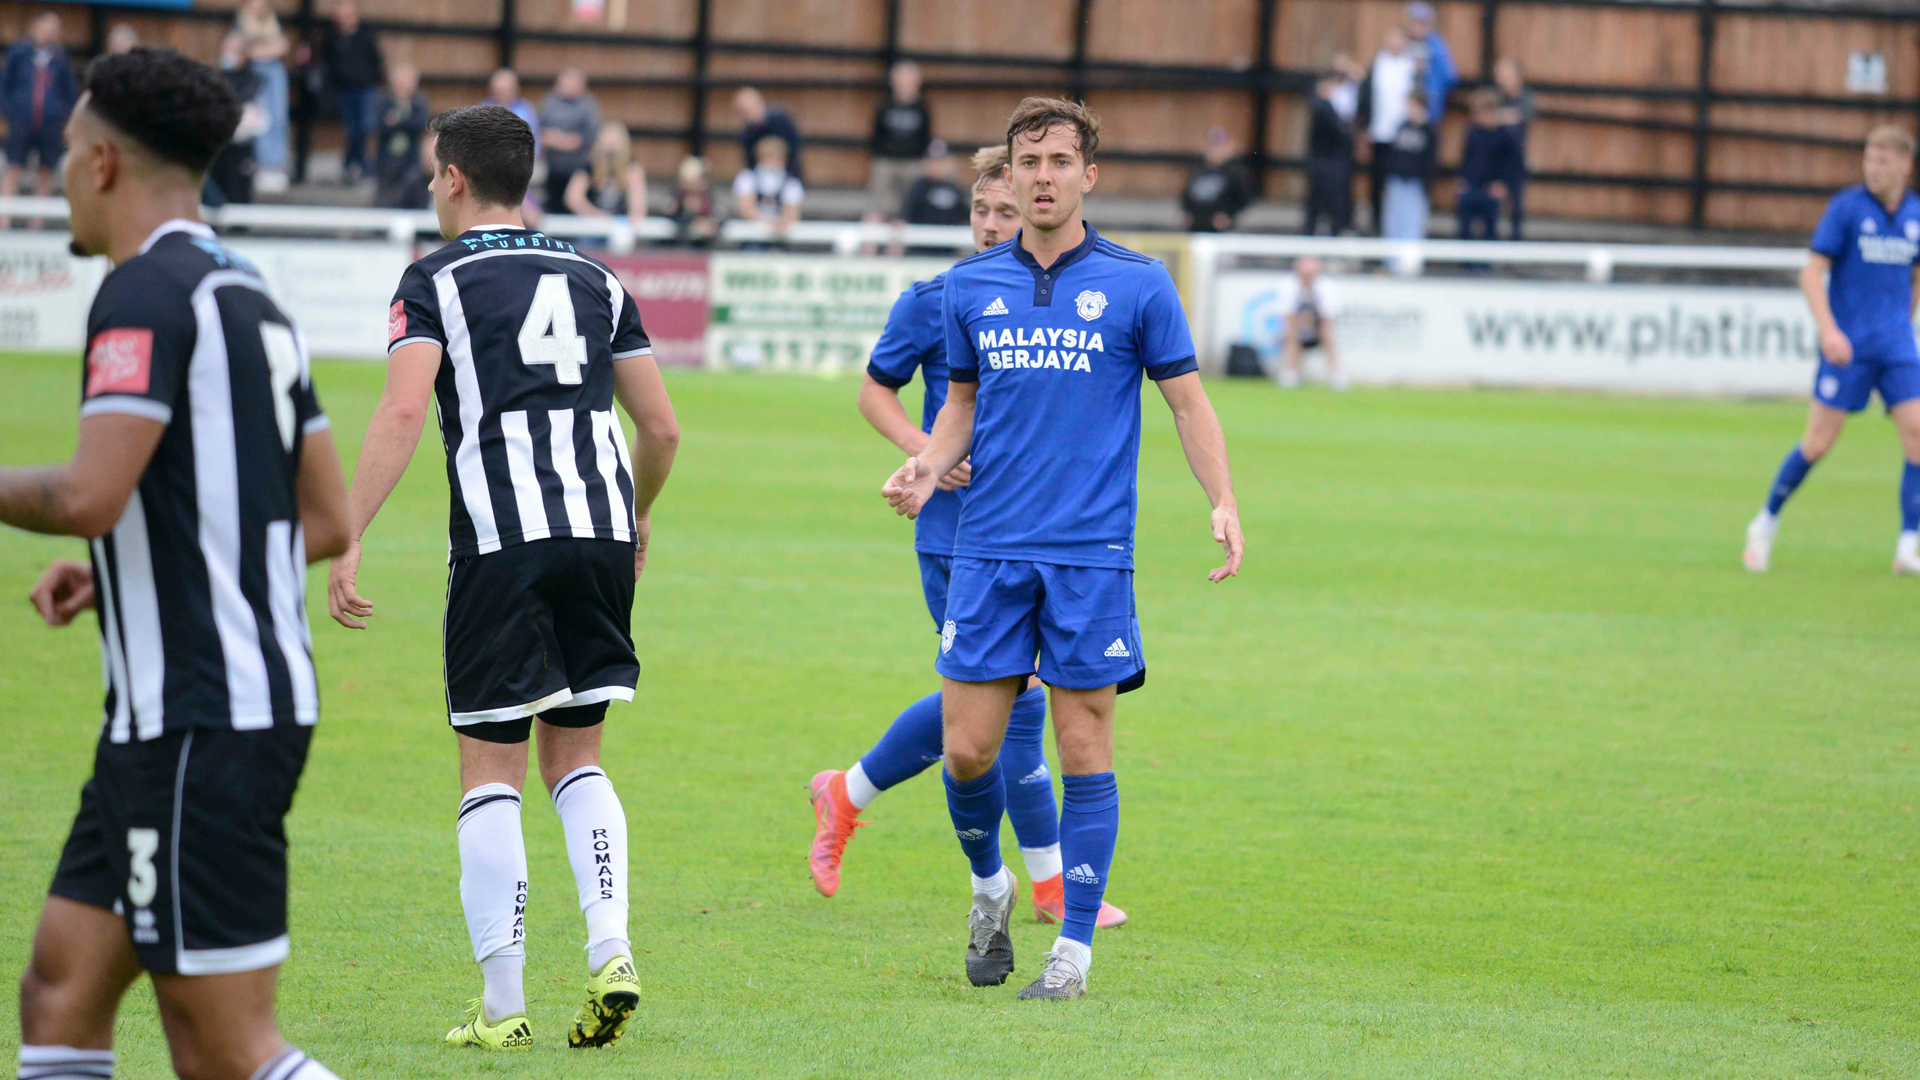 Ryan Wintle in action at Bath City...